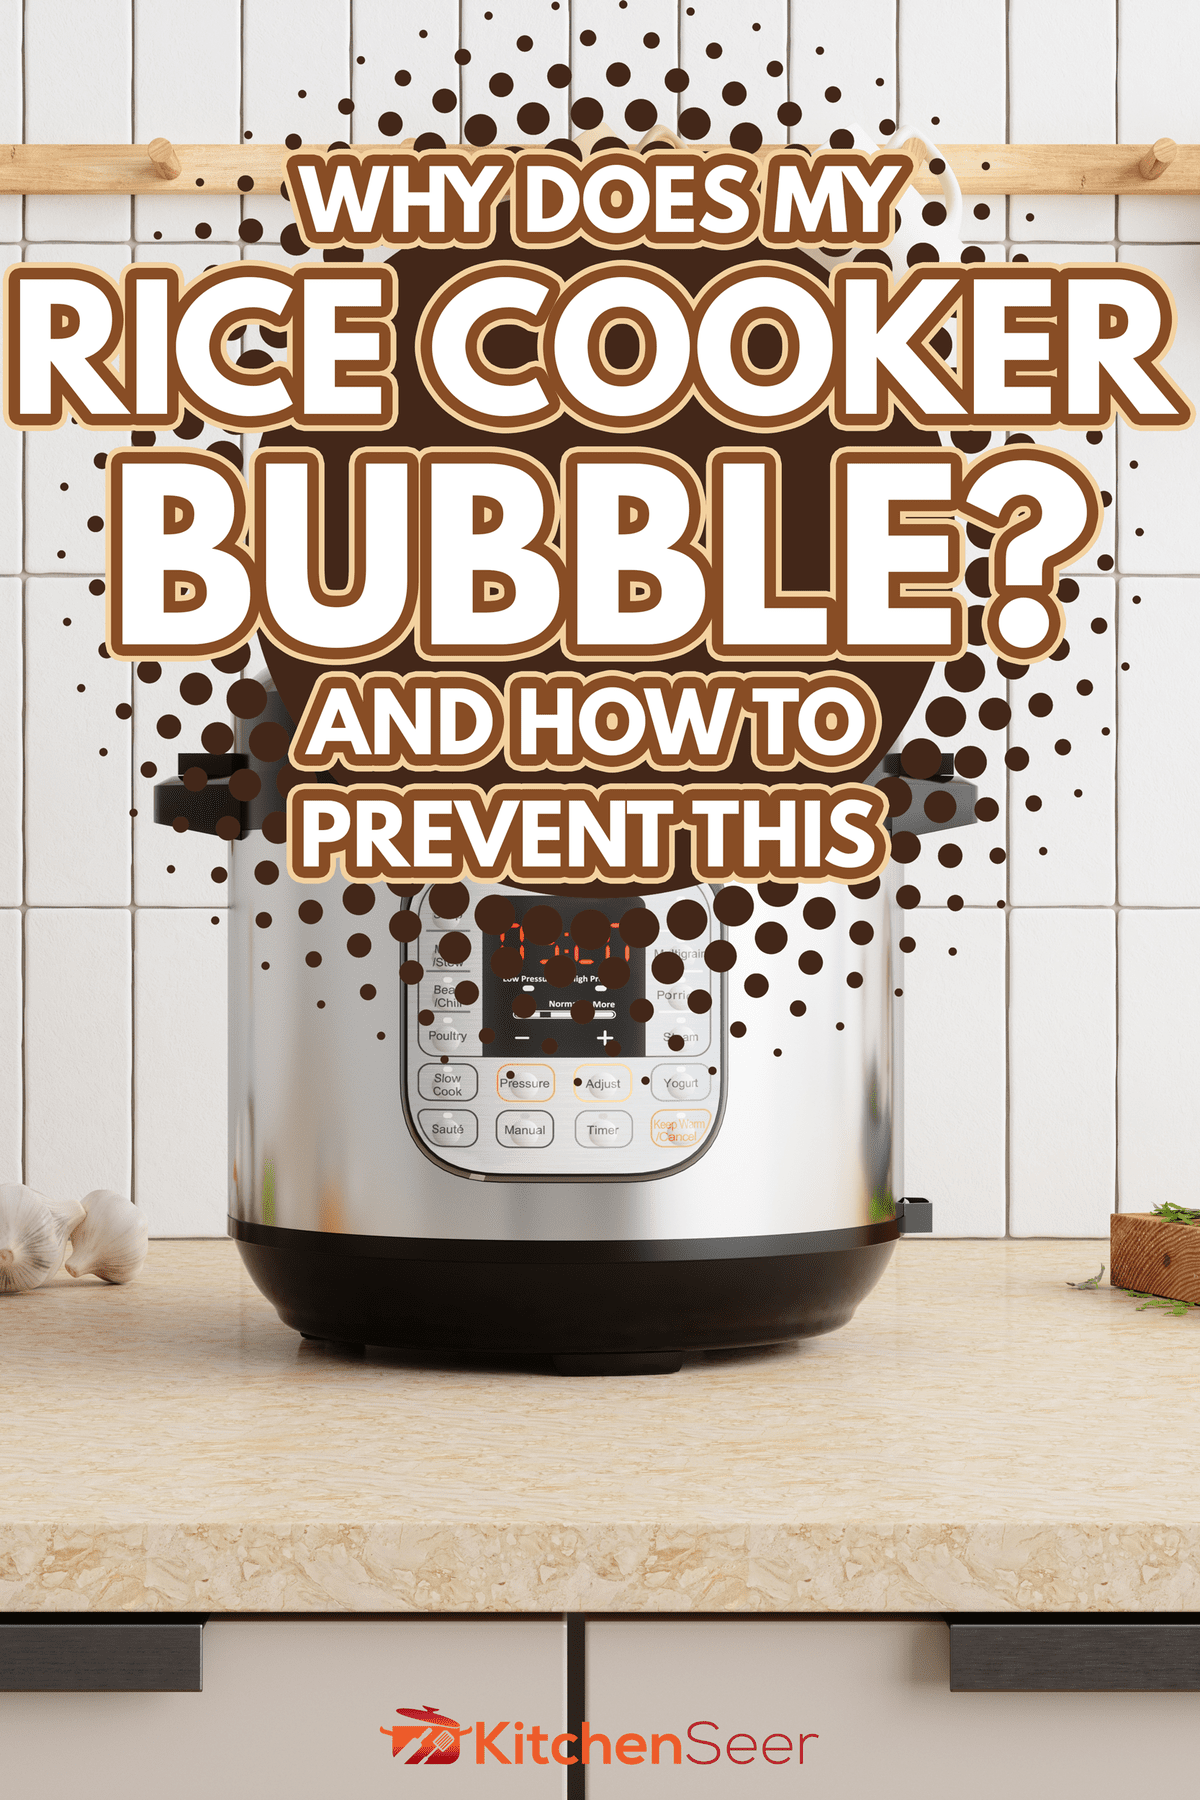 Multi Cooker On Kitchen Counter With Onions, Garlic, Cooking Oil And Cutting Board - Why Does My Rice Cooker Bubble? And How To Prevent This